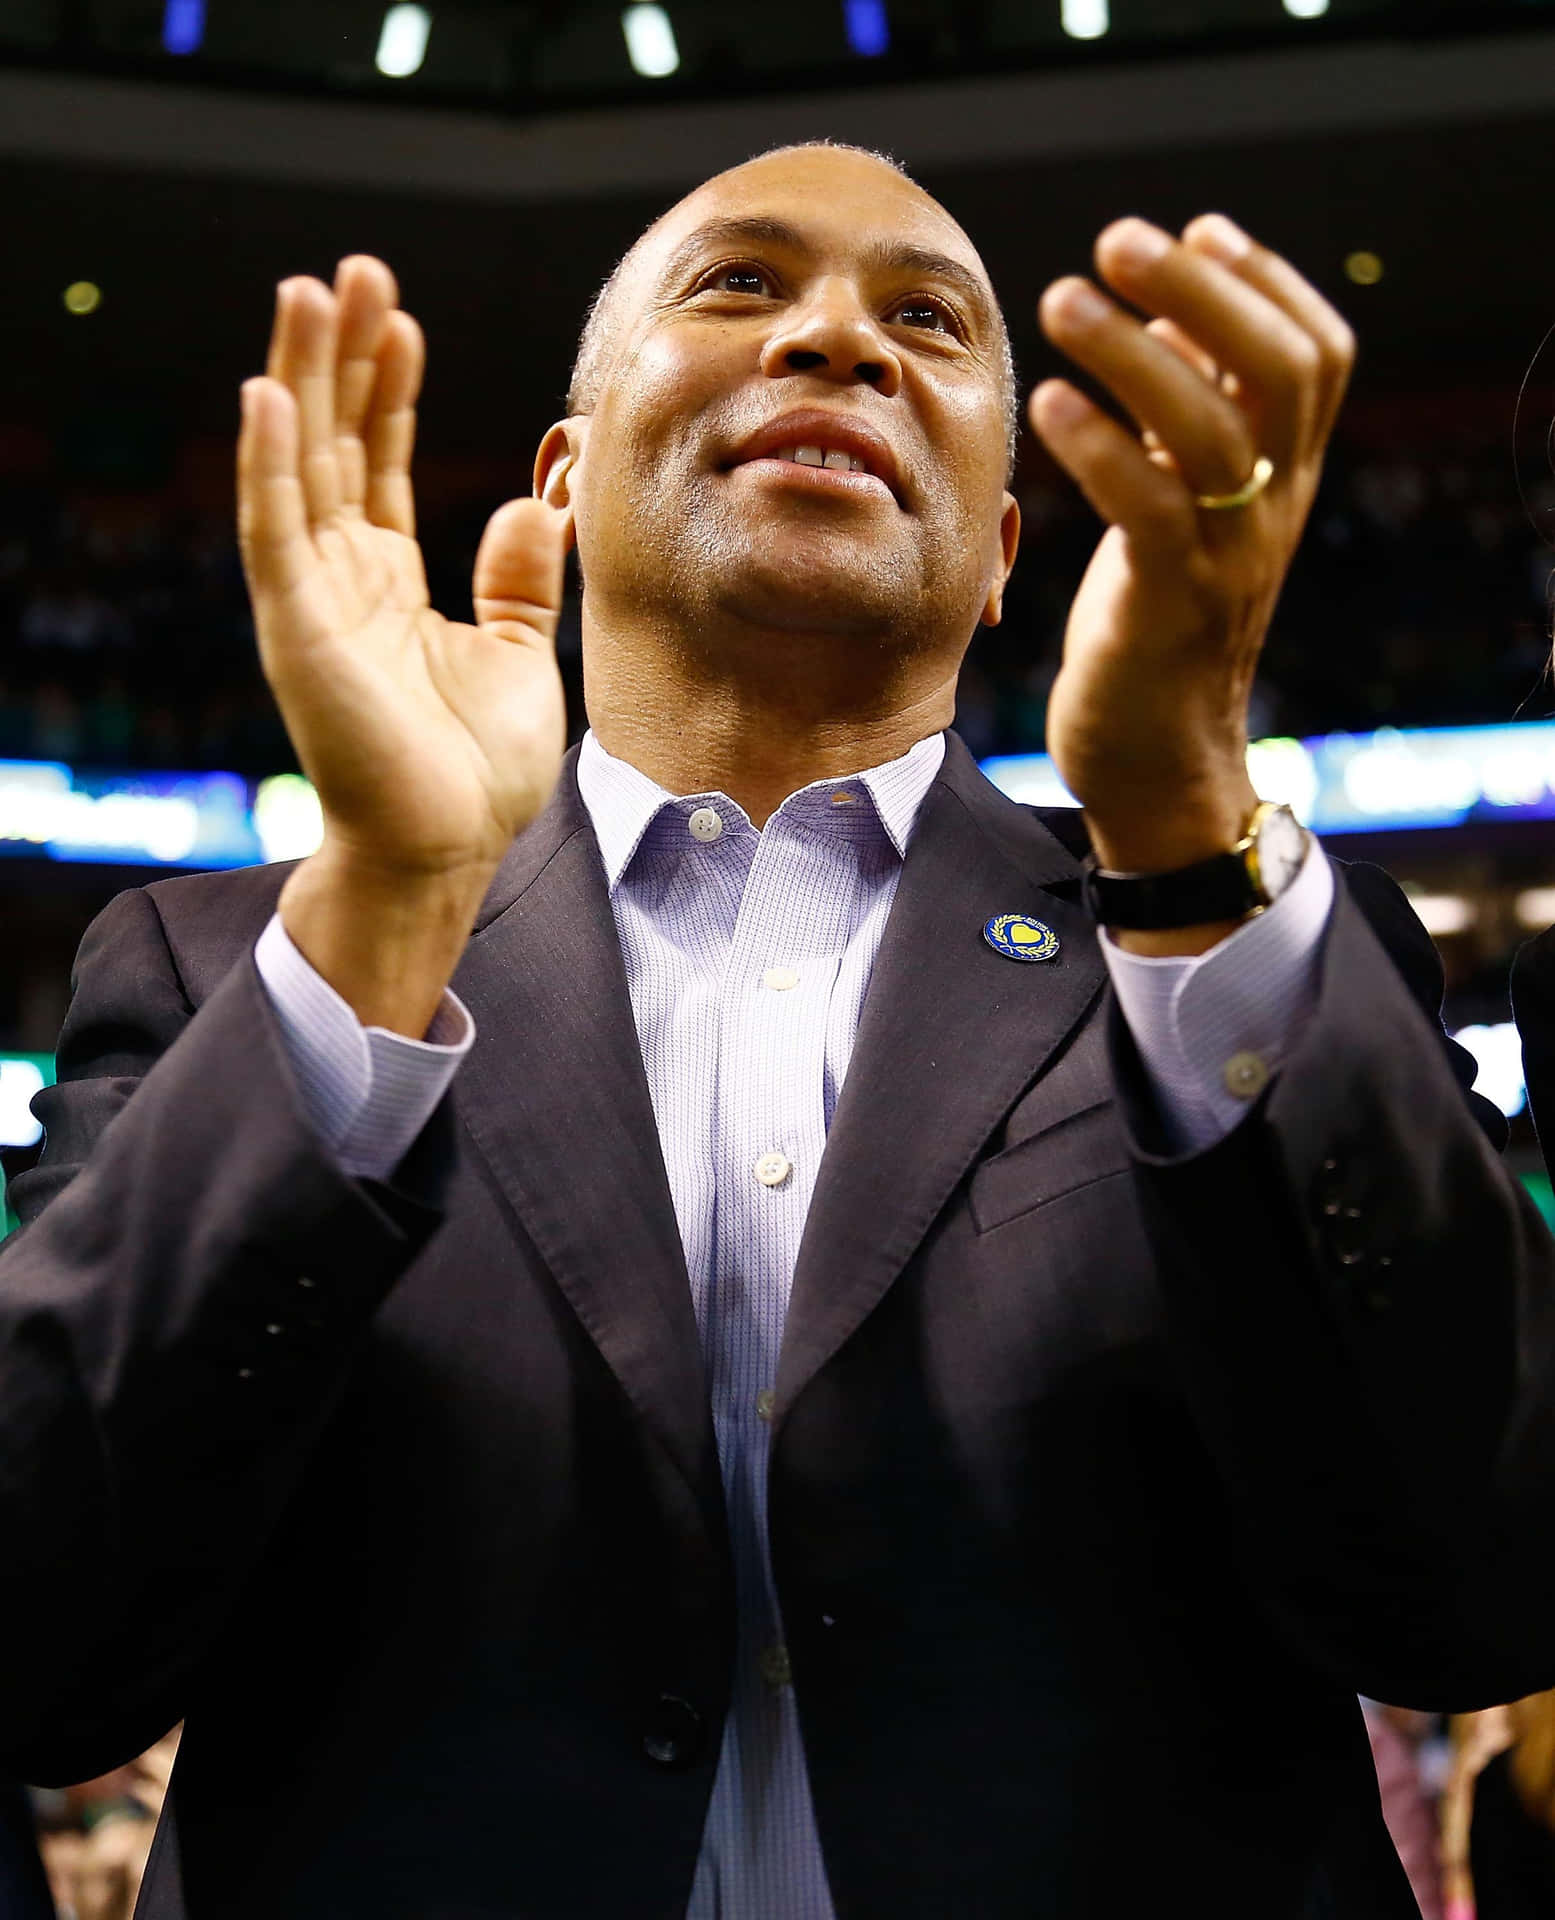 Enthusiastic Deval Patrick, Clapping at an Event Wallpaper